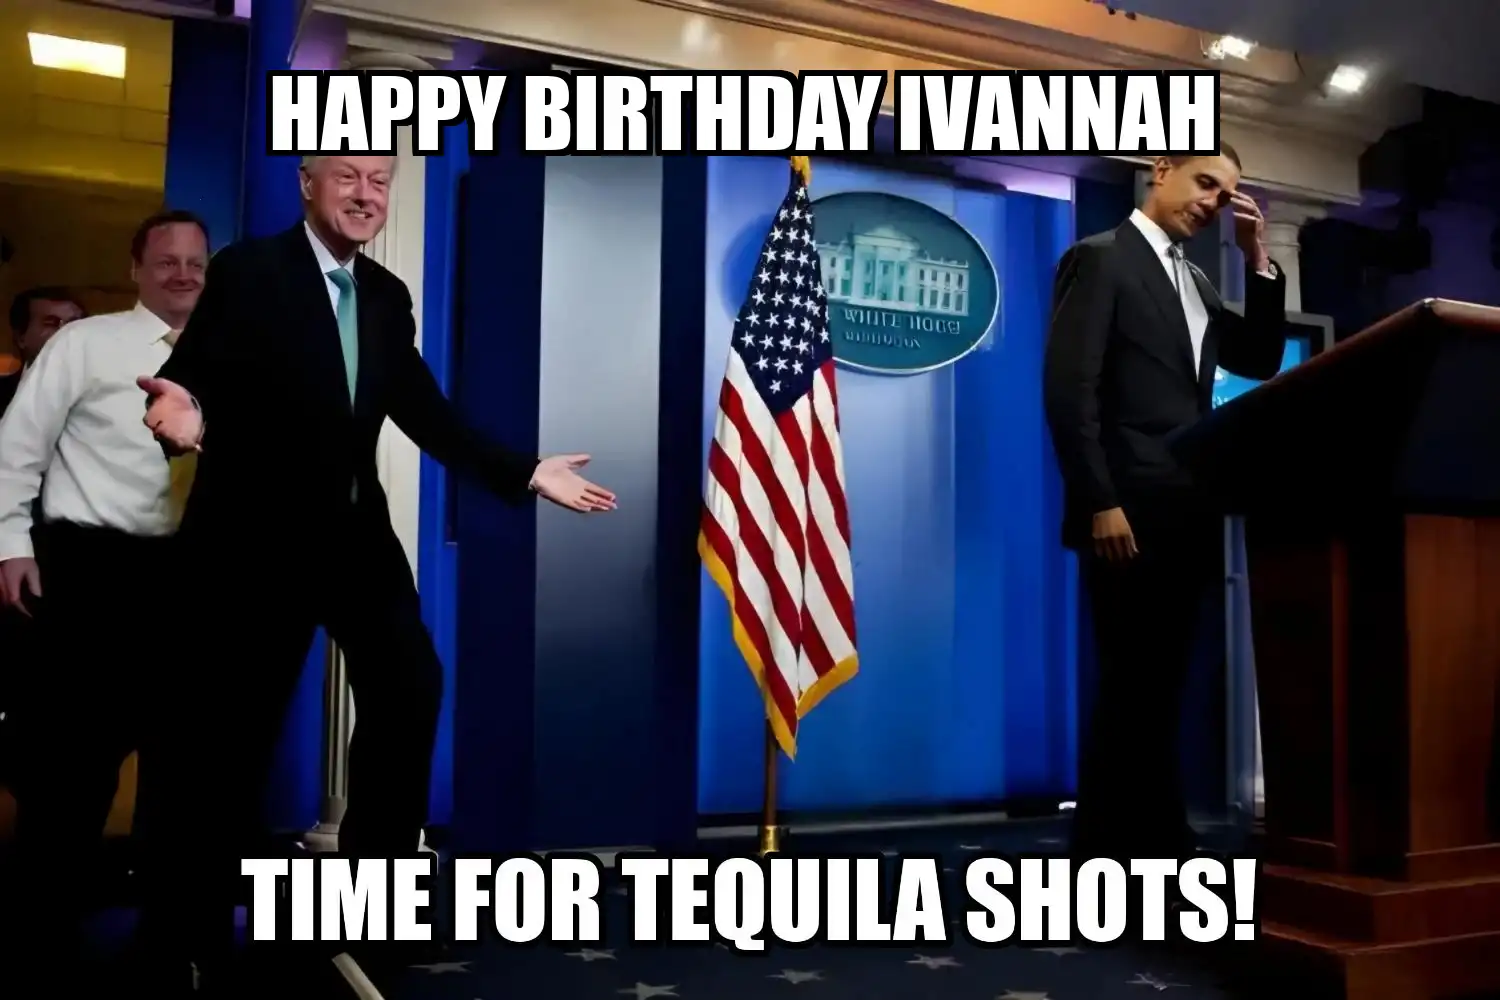 Happy Birthday Ivannah Time For Tequila Shots Memes